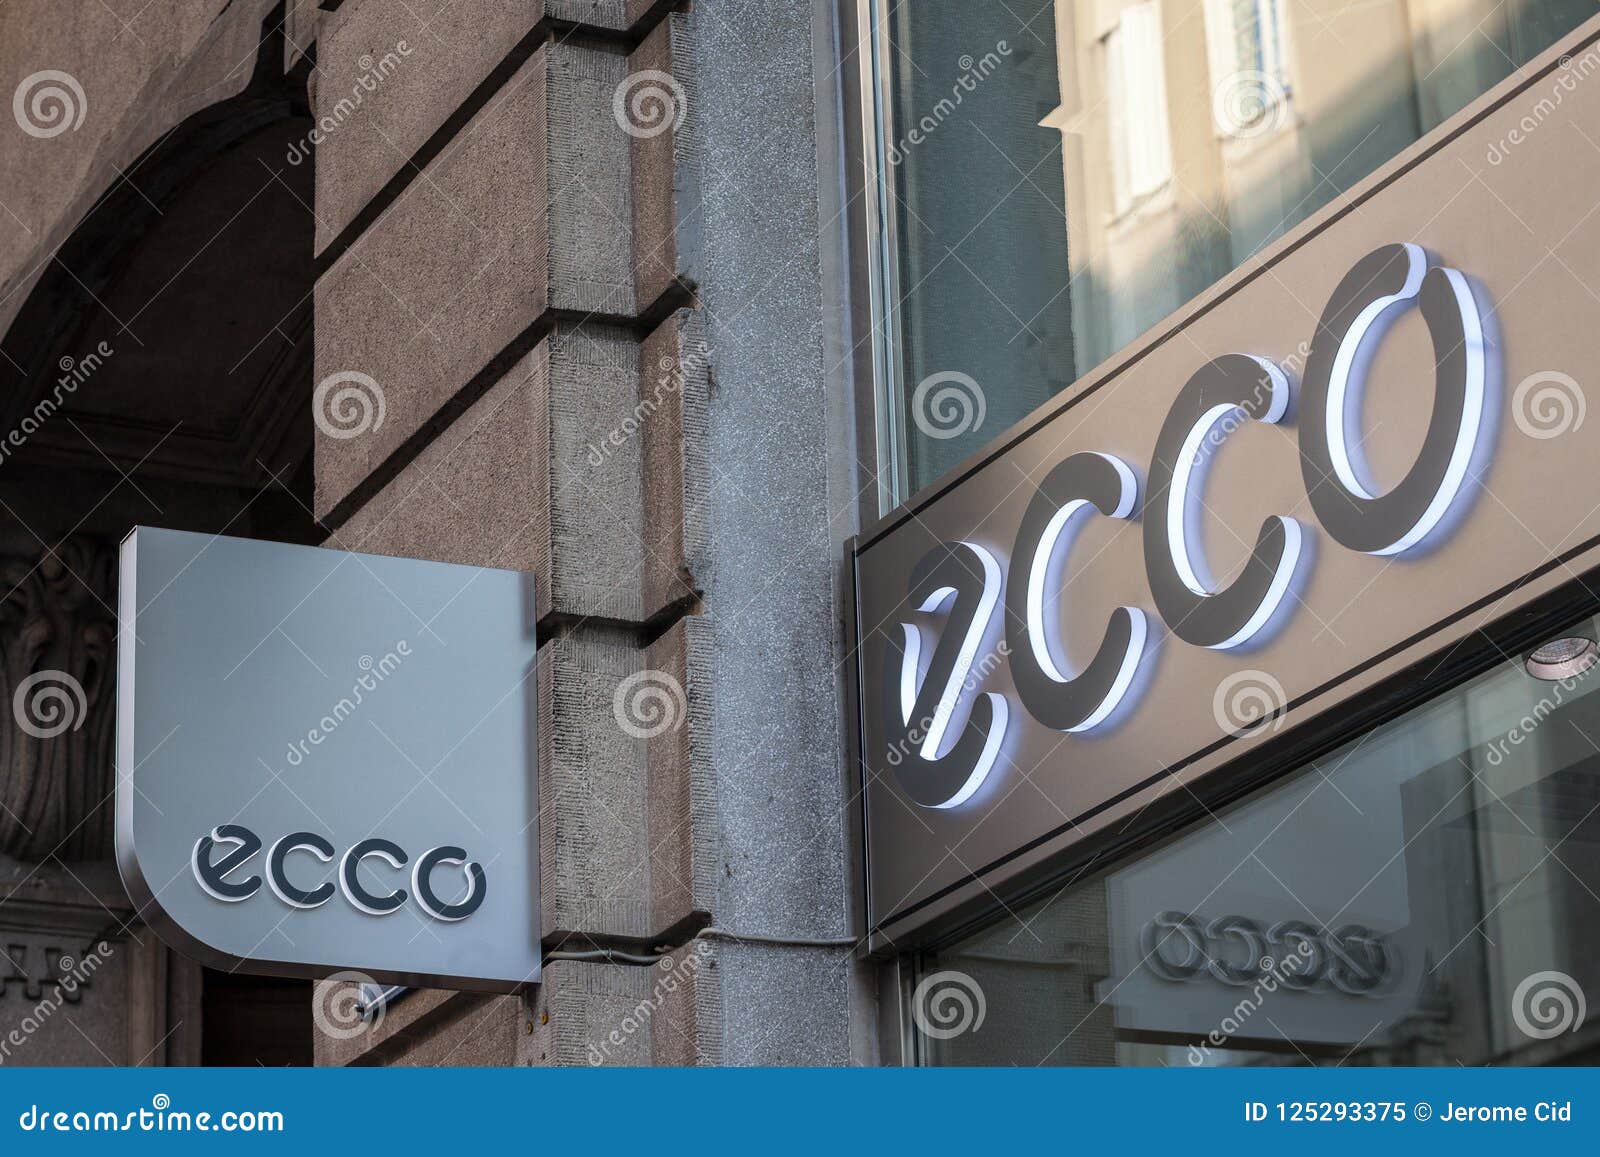 færge arkitekt Vær stille Ecco Sko Logo on Their Main Store for Serbia in Belgrade. Ecco is a Danish  Brand of Shoes Editorial Image - Image of danish, later: 125293375